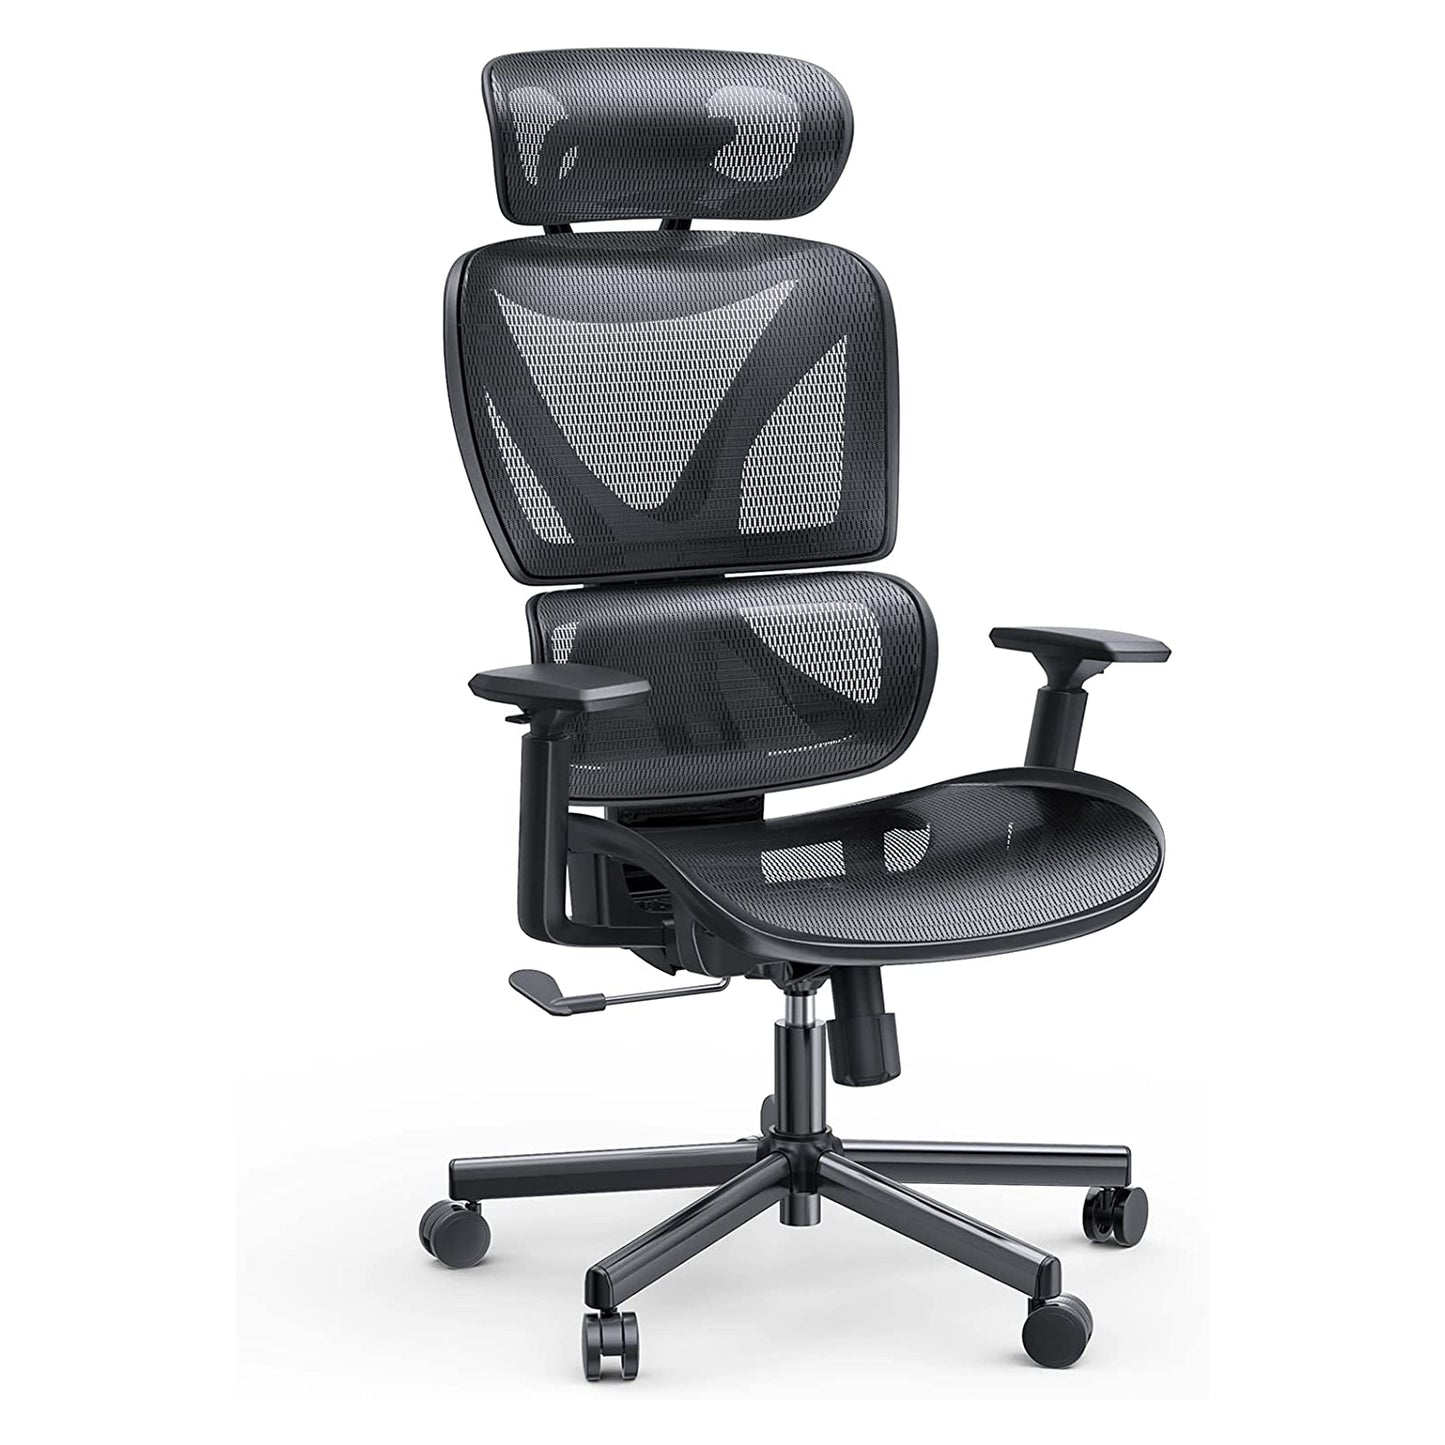 Lumbar Support Office Chairs at